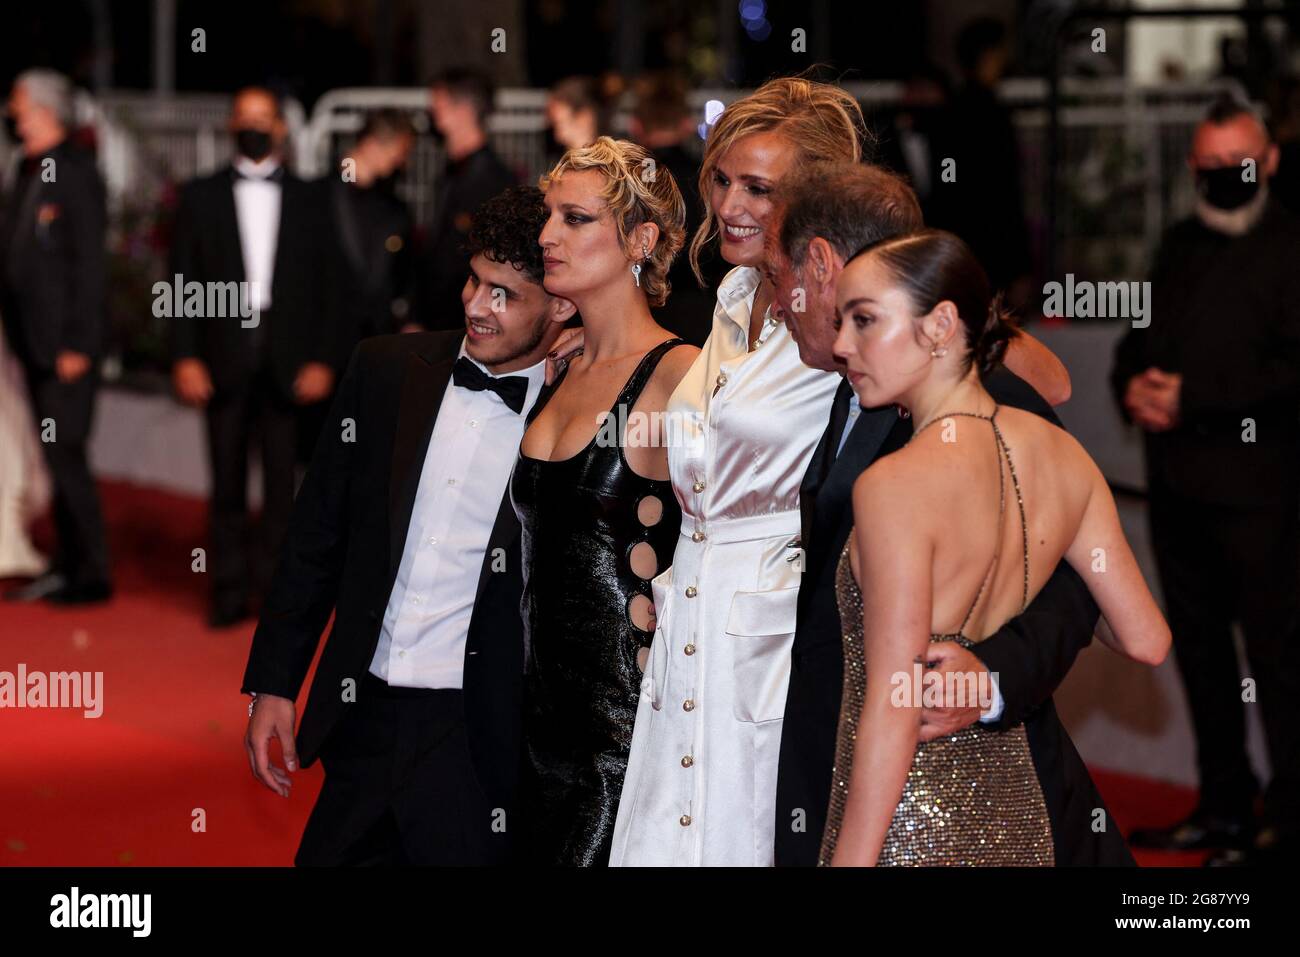 CANNES - JULY 13: Jean-Christophe Reymond, Vincent Lindon, Julia Ducournau,  Agathe Rousselle, Garance Marillier and Lai?s Salameh arrives to the  premiere of " TITANE " during the 74th Cannes Film Festival on